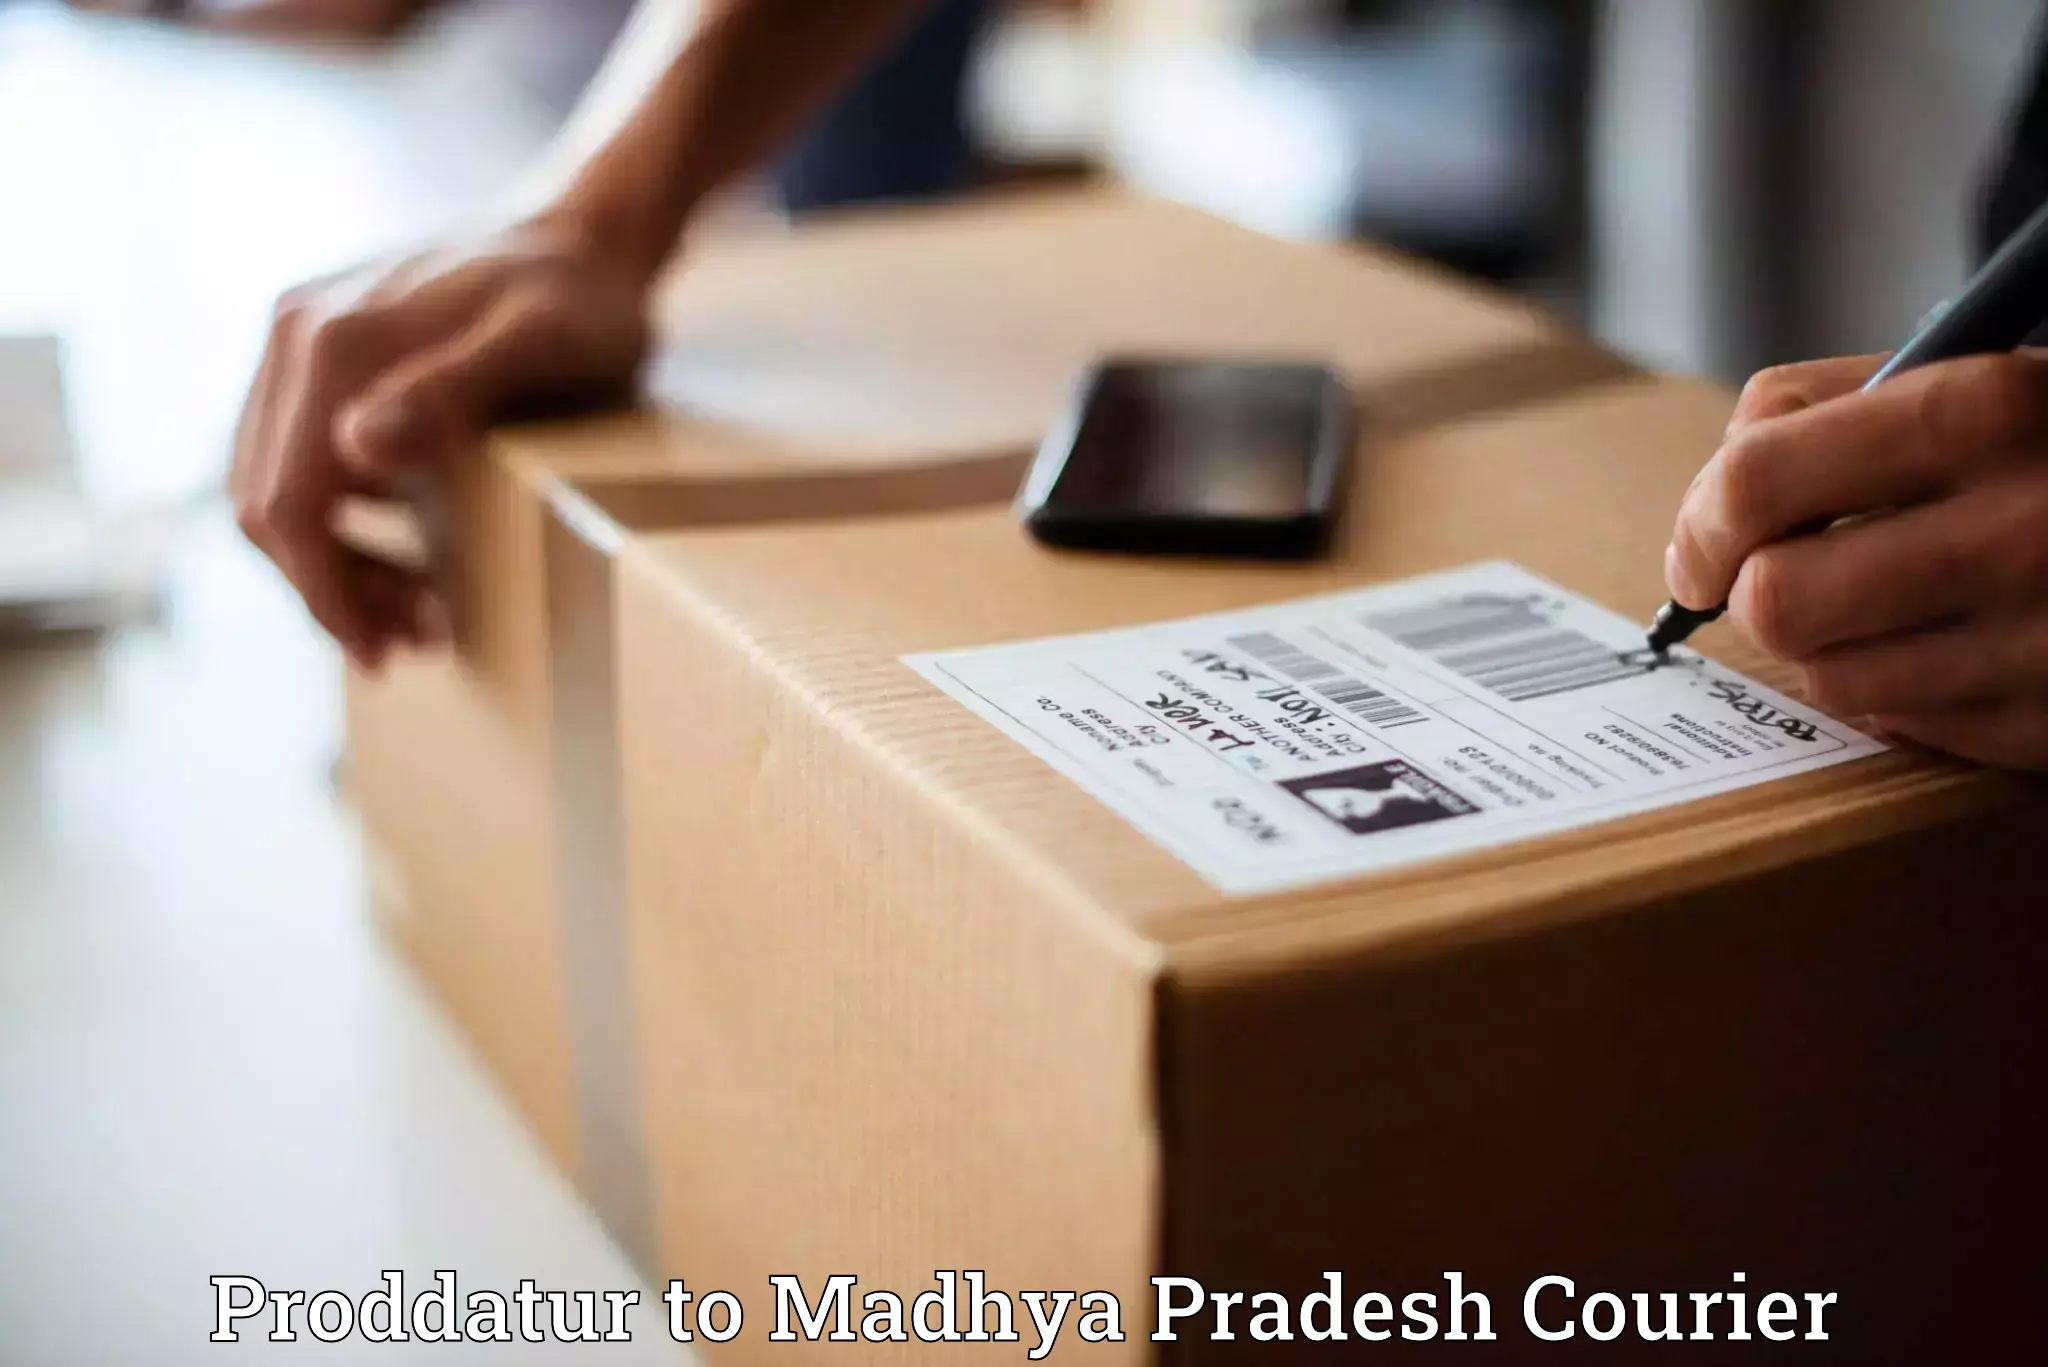 Express delivery capabilities Proddatur to Khandwa